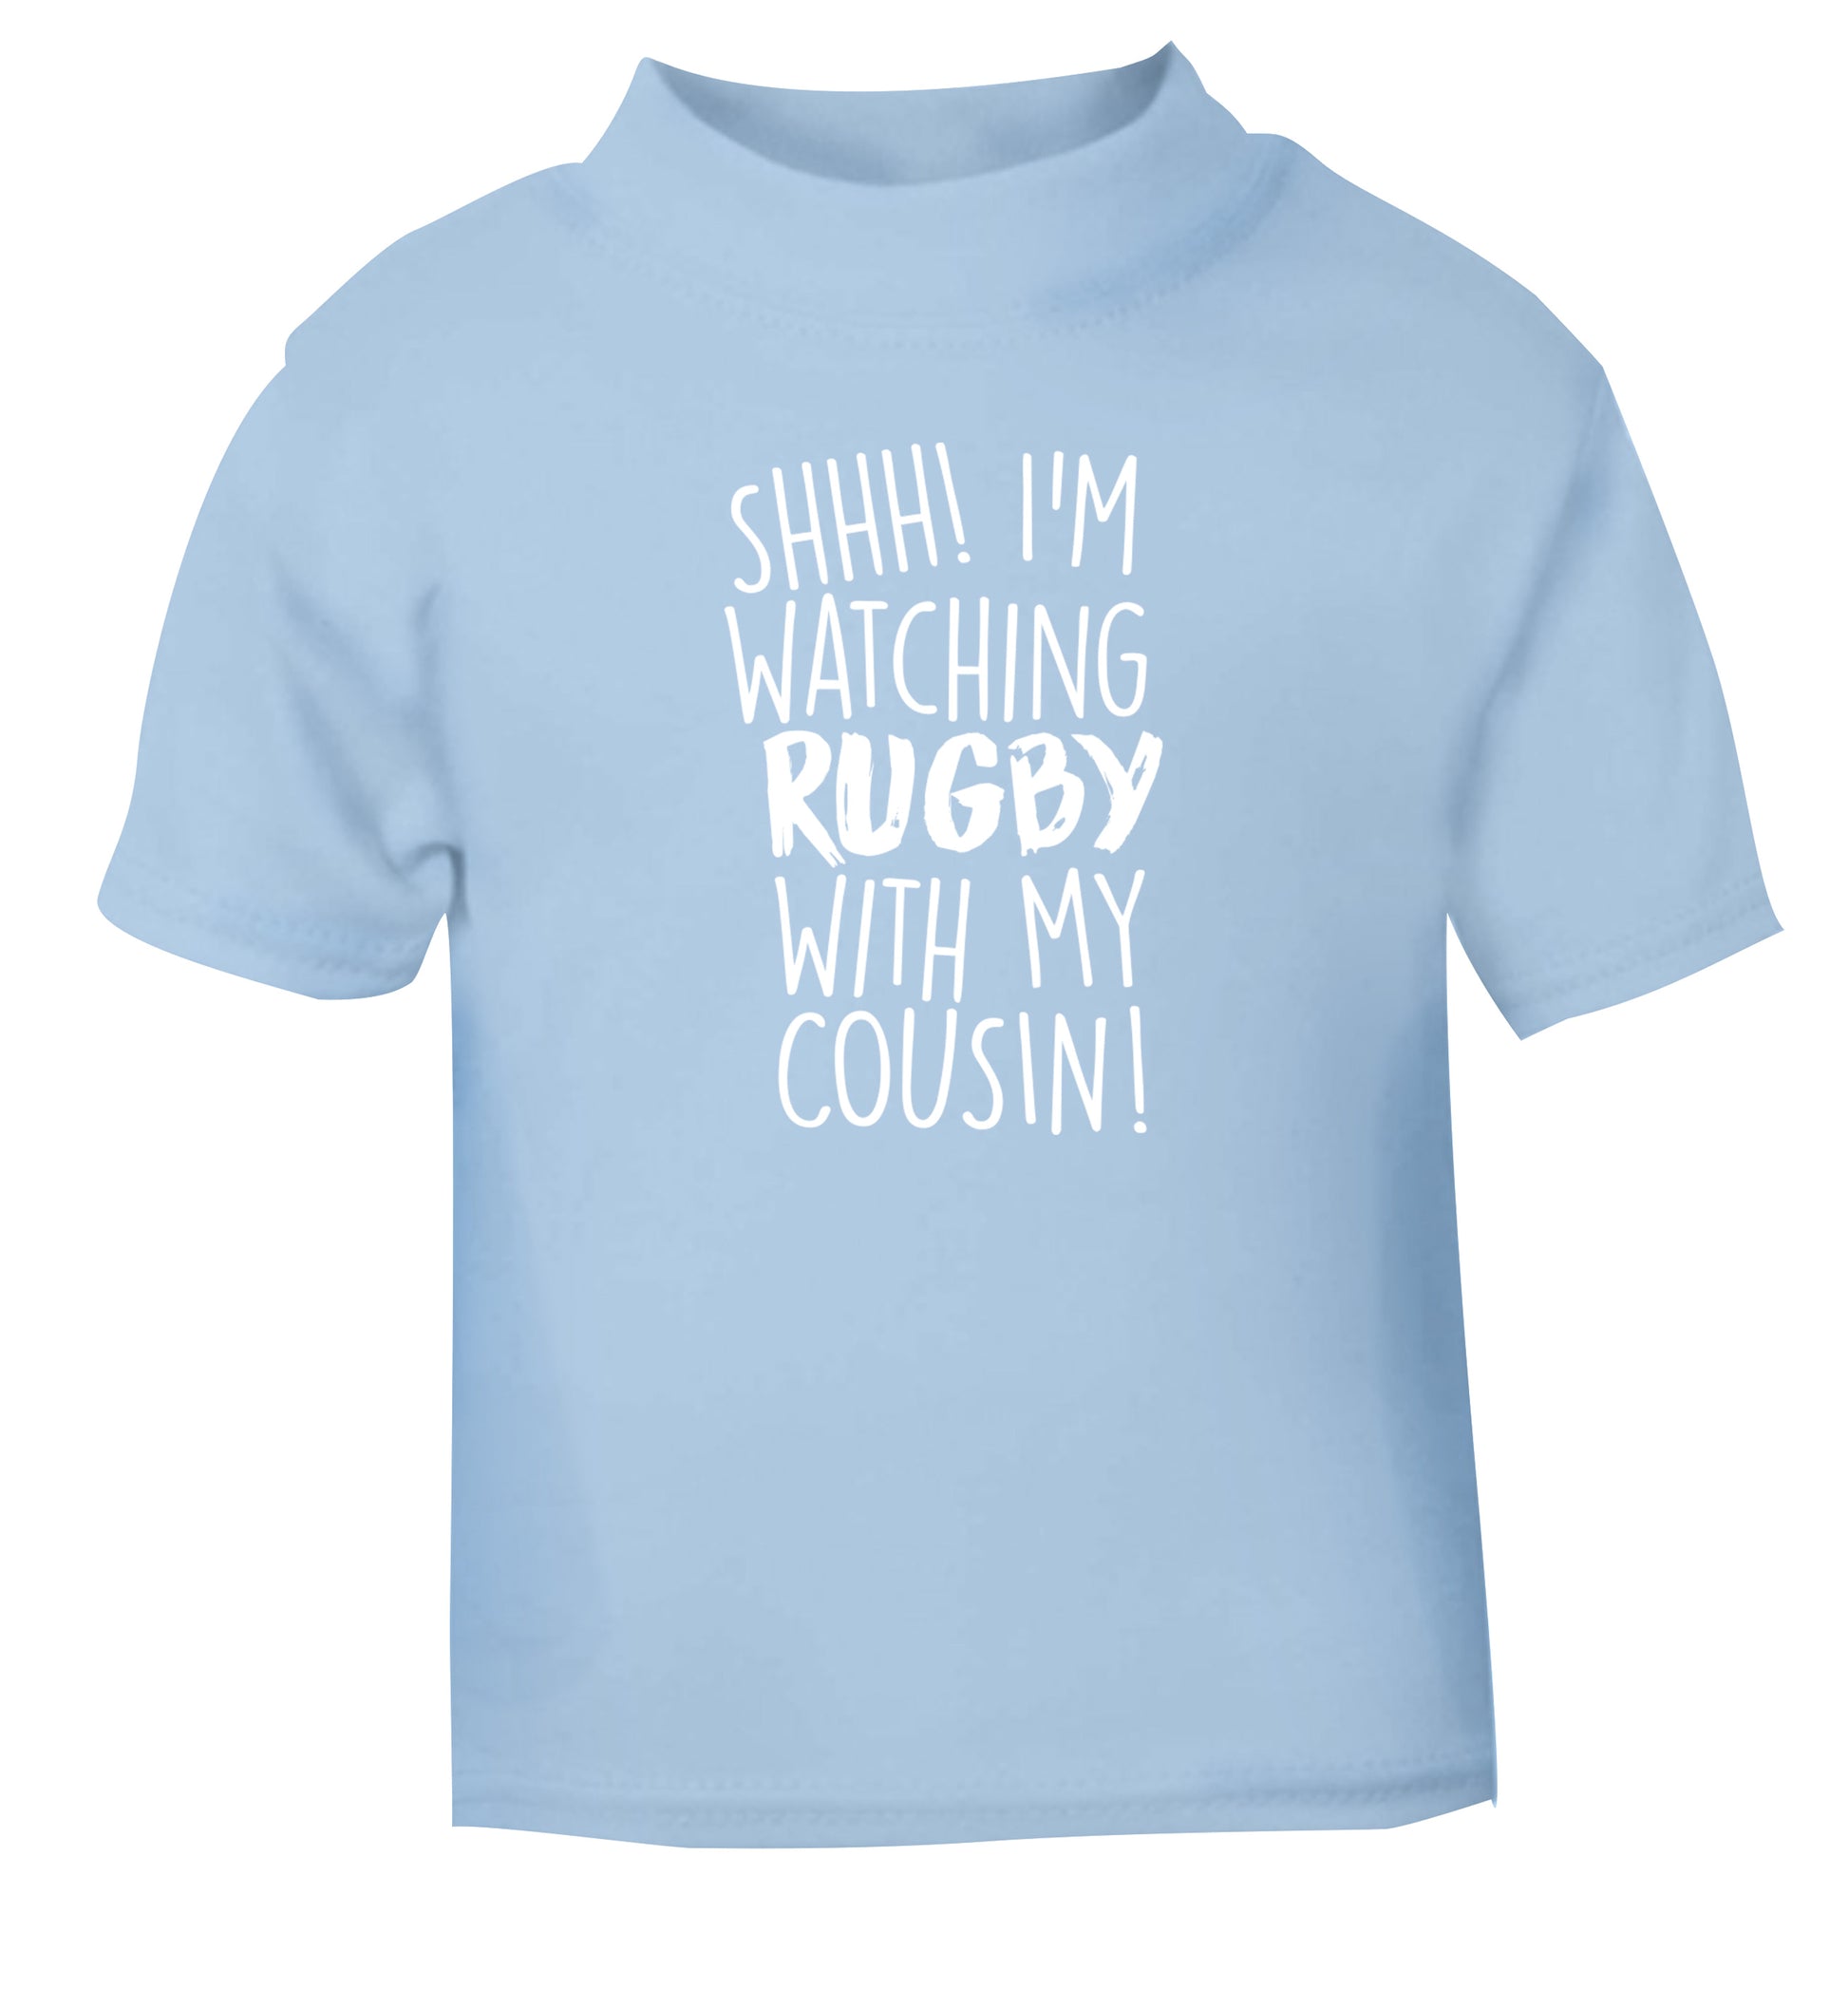 Shhh I'm watching rugby with my cousin light blue Baby Toddler Tshirt 2 Years